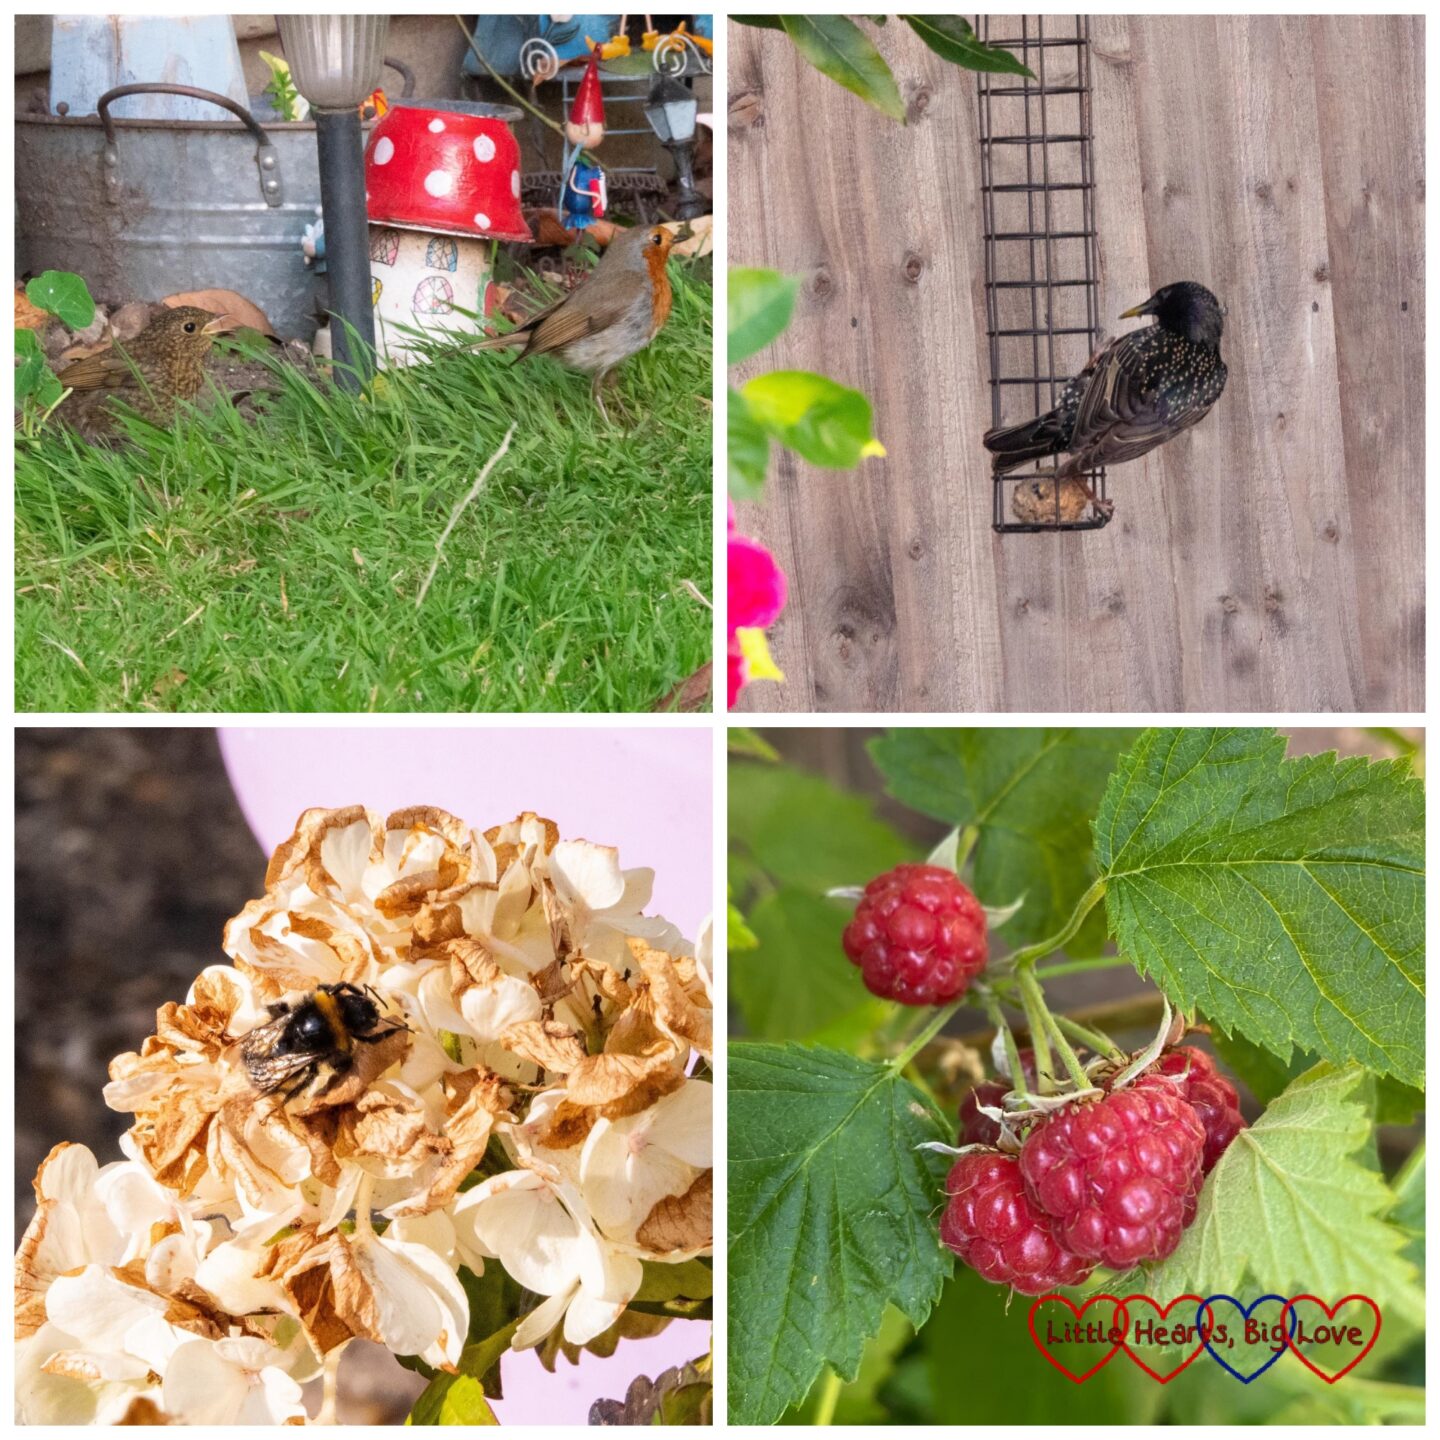 A robin and its chick in the fairy garden; a starling on the fat ball feeder; a bee on the hydrangea; raspberries ripening on the raspberry bush